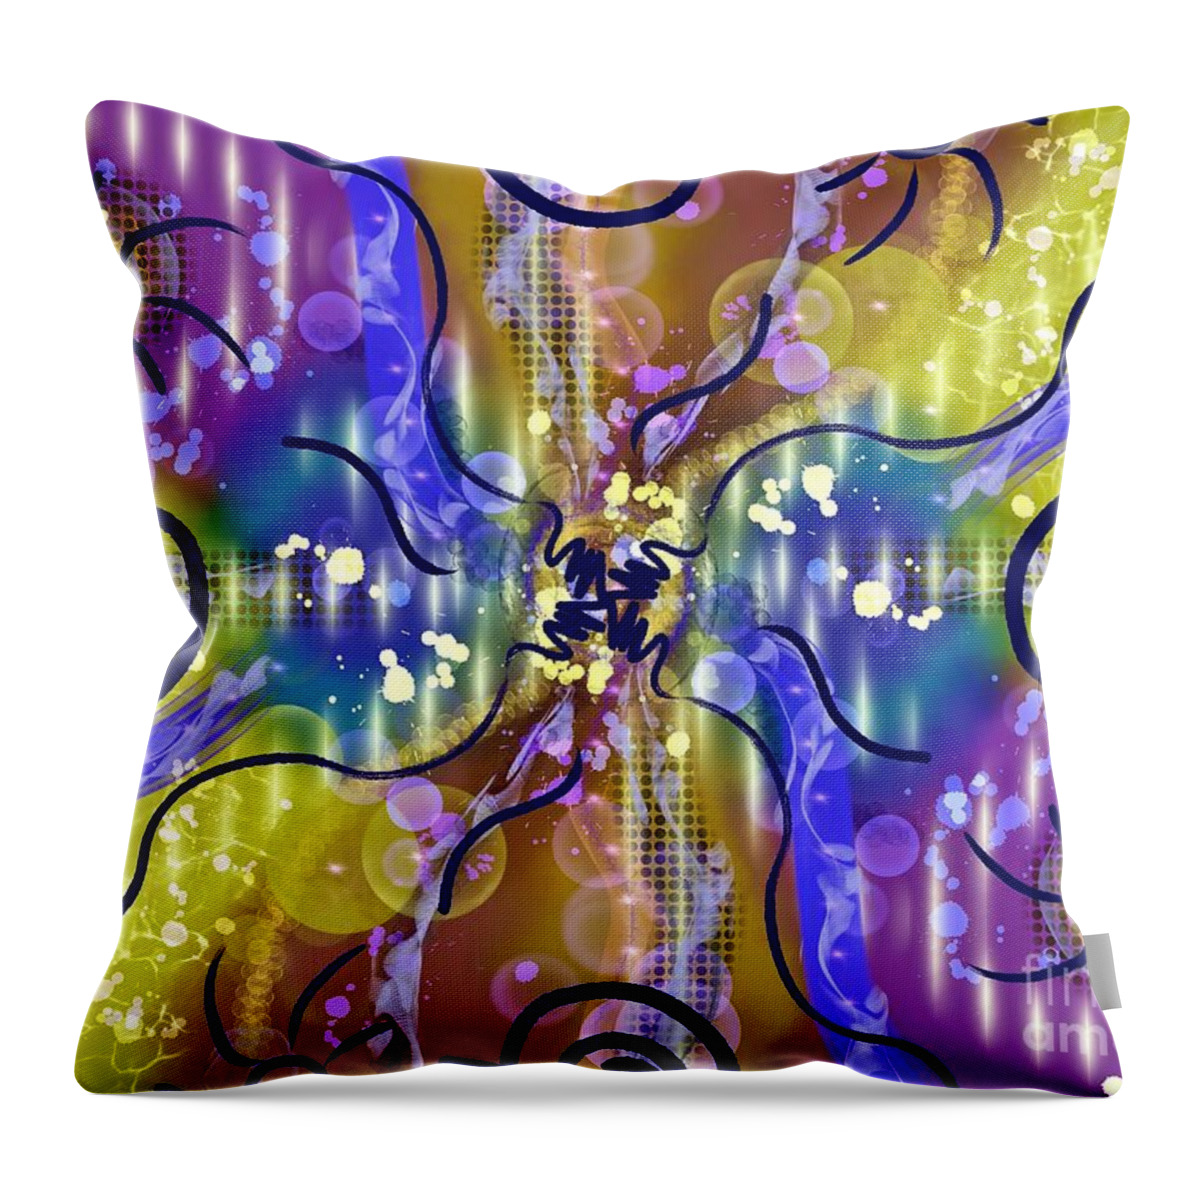 Reiki Power Symbol Throw Pillow featuring the digital art Reiki Power Symbol by Laurie's Intuitive